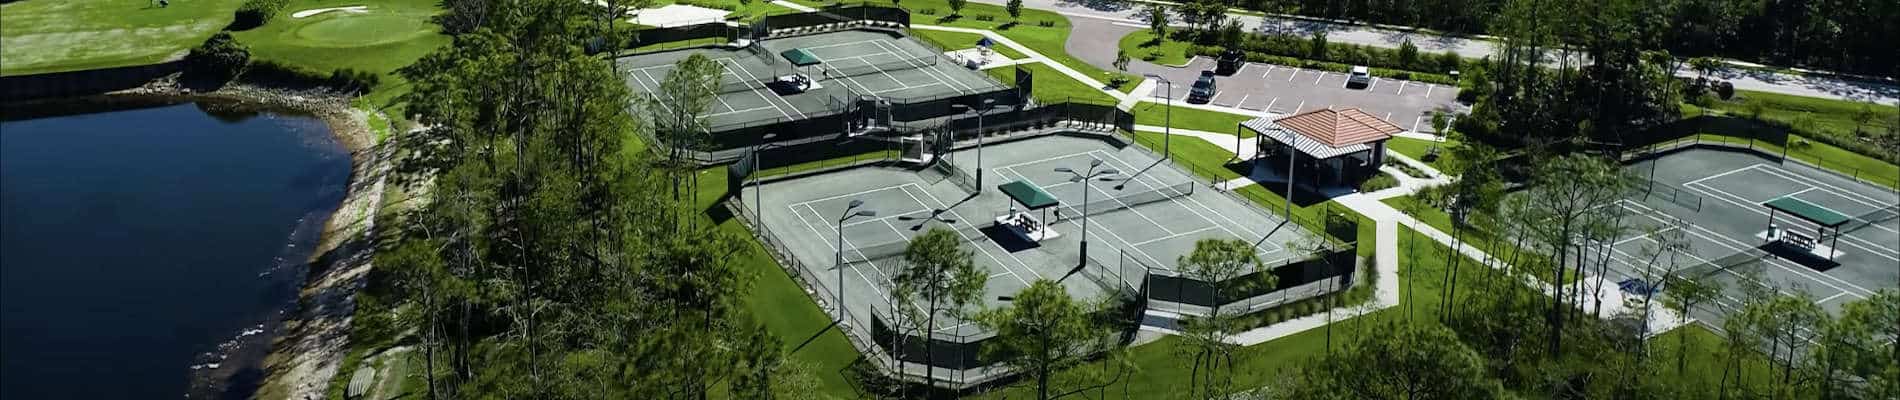 Naples Heritage Golf and Country Club Tennis and Pickleball Courts